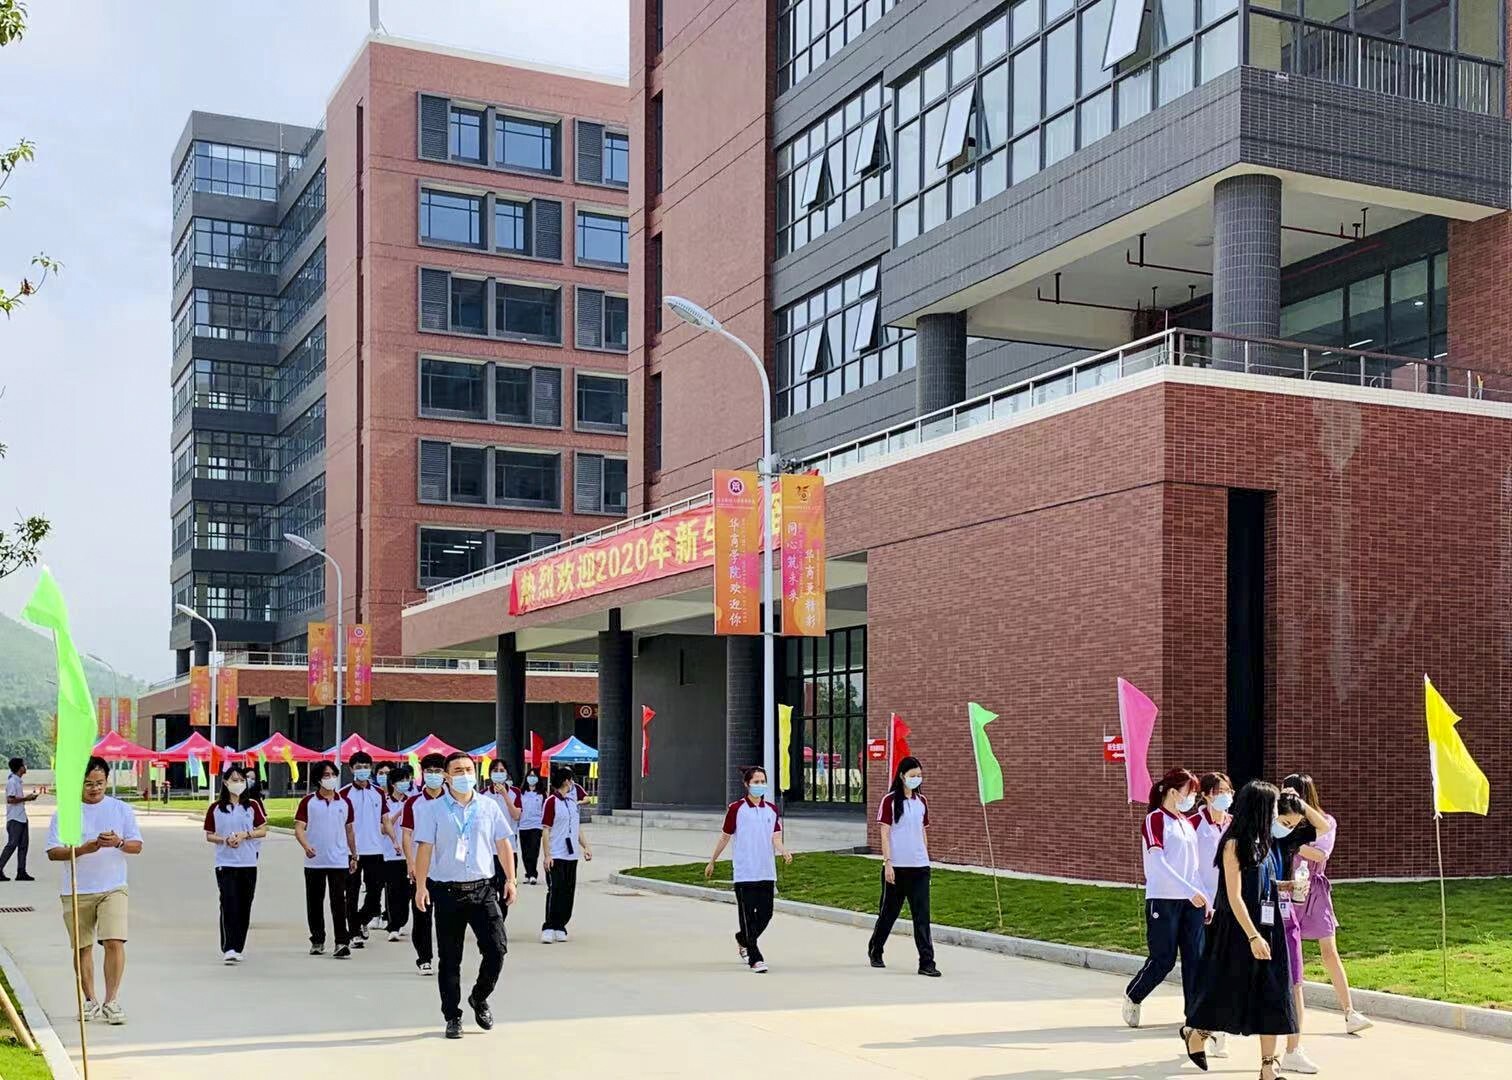 The Zhaoqing campus of Edvantage Group, where it offers courses in finance and hospitality. Photo: Handout